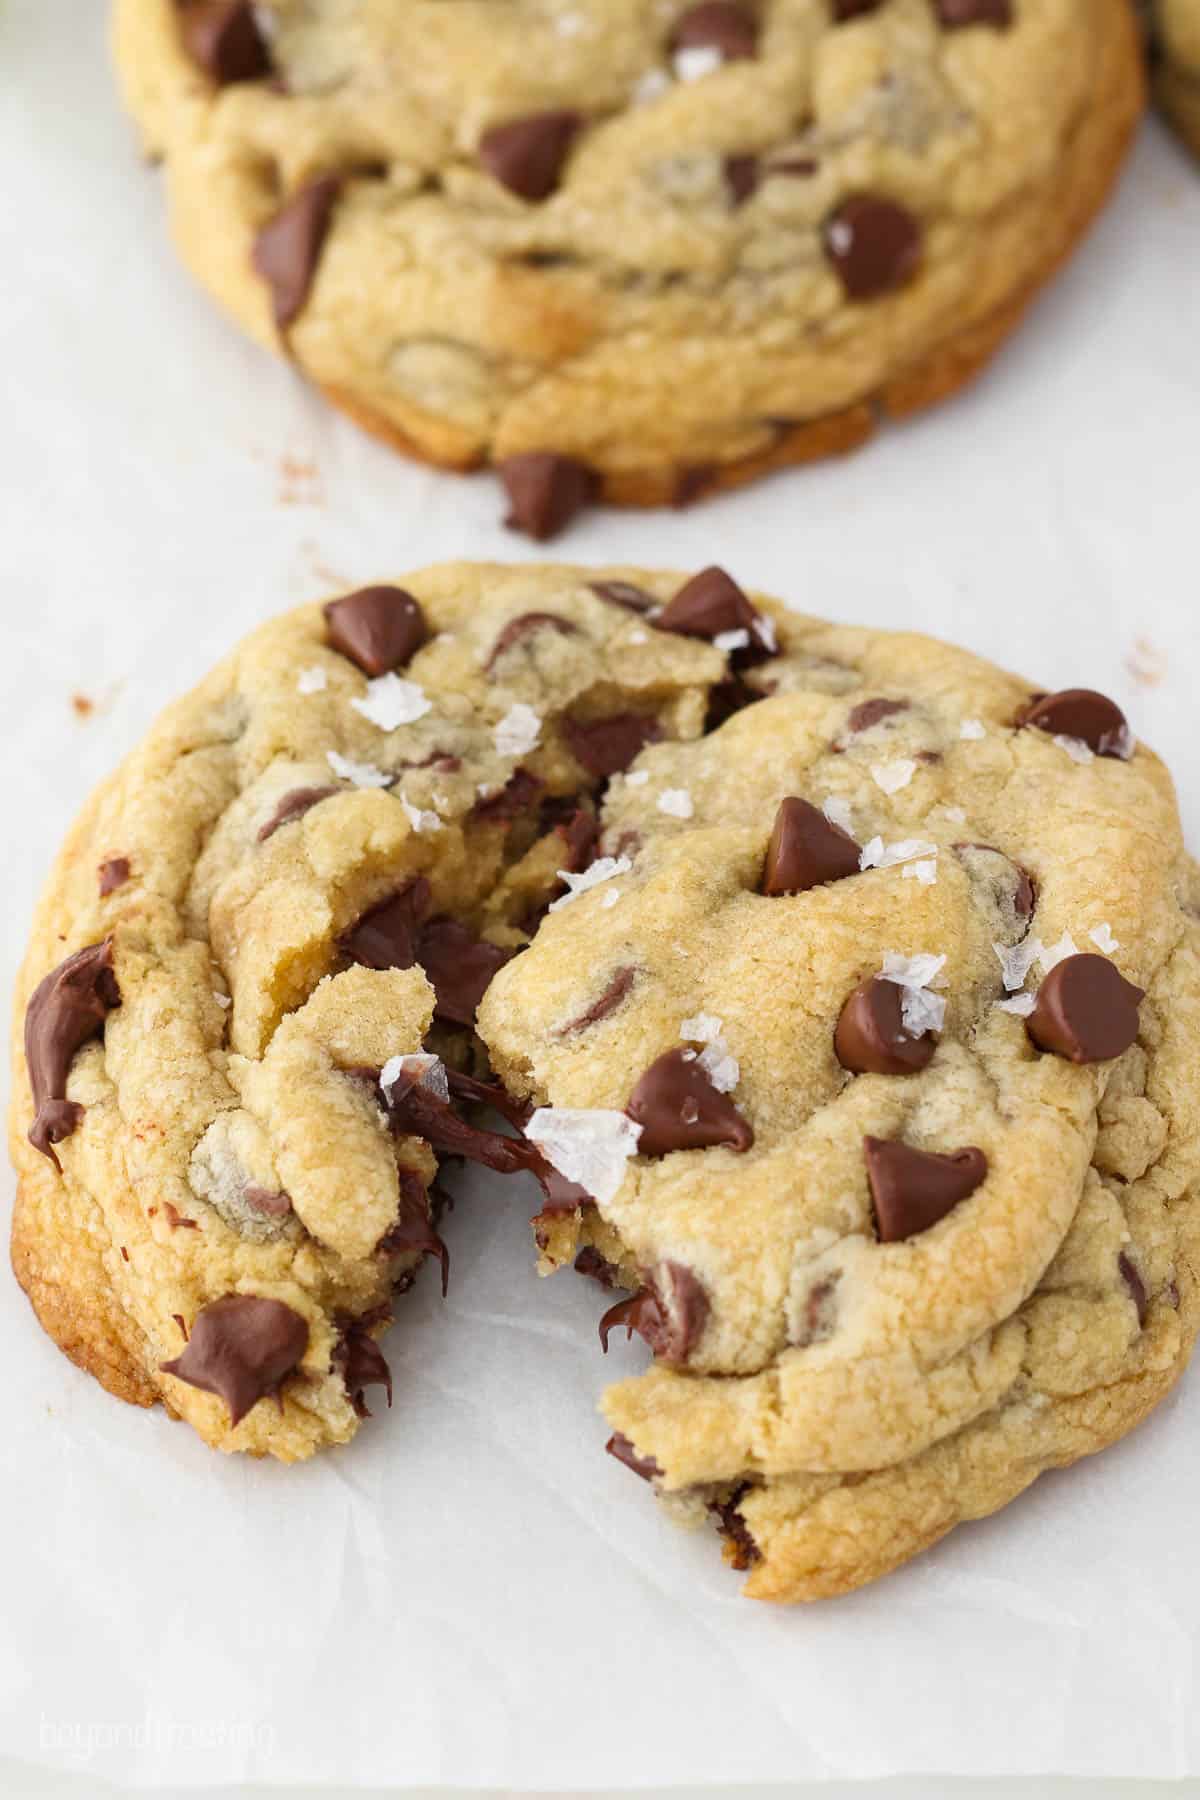 Angled view of a thick giant chocolate chip cookie split in half with a gooey center